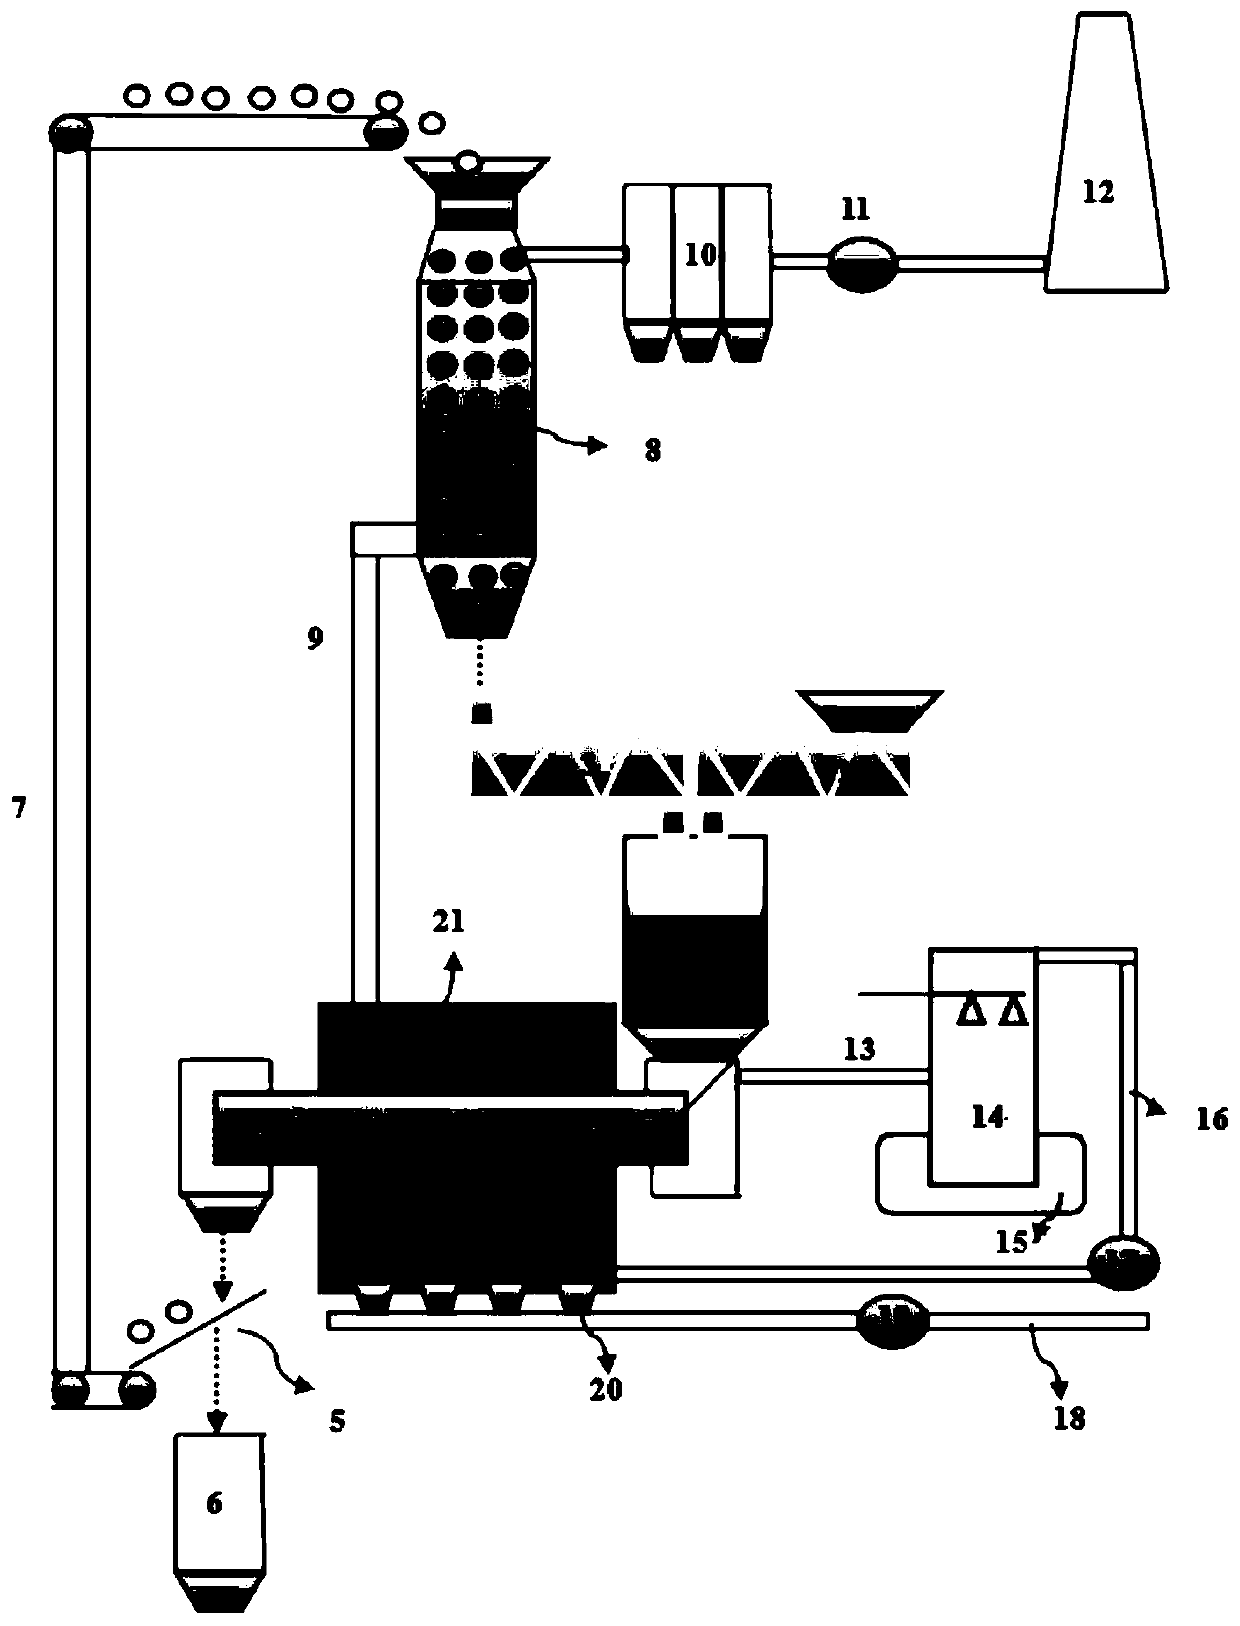 Sludge drying and dewatering equipment and method